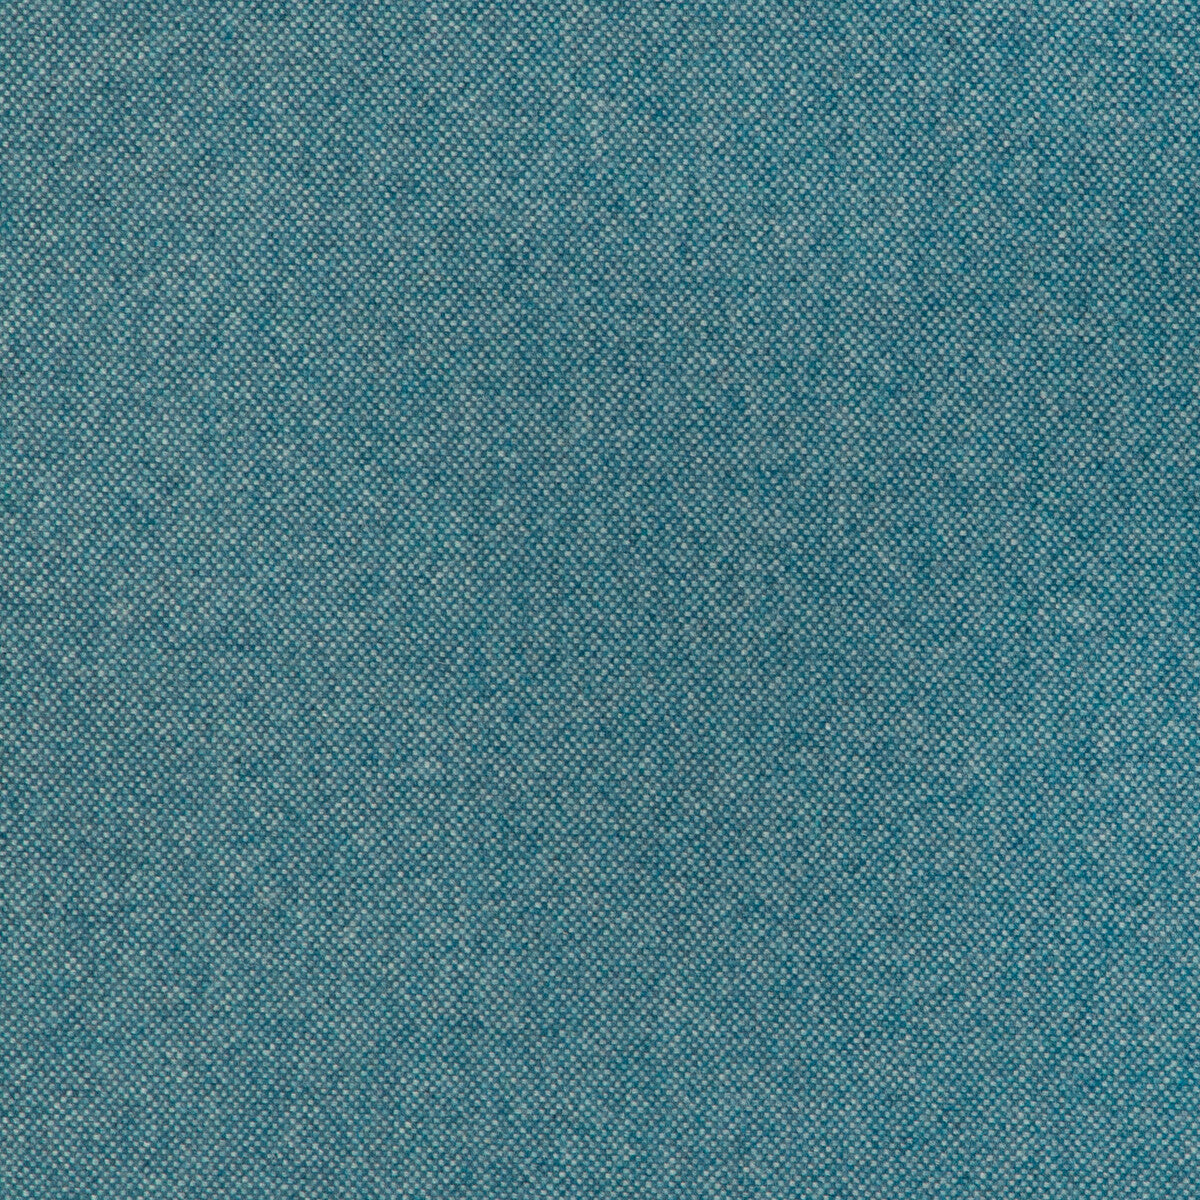 Manchester Wool fabric in pool color - pattern 37026.155.0 - by Kravet Contract